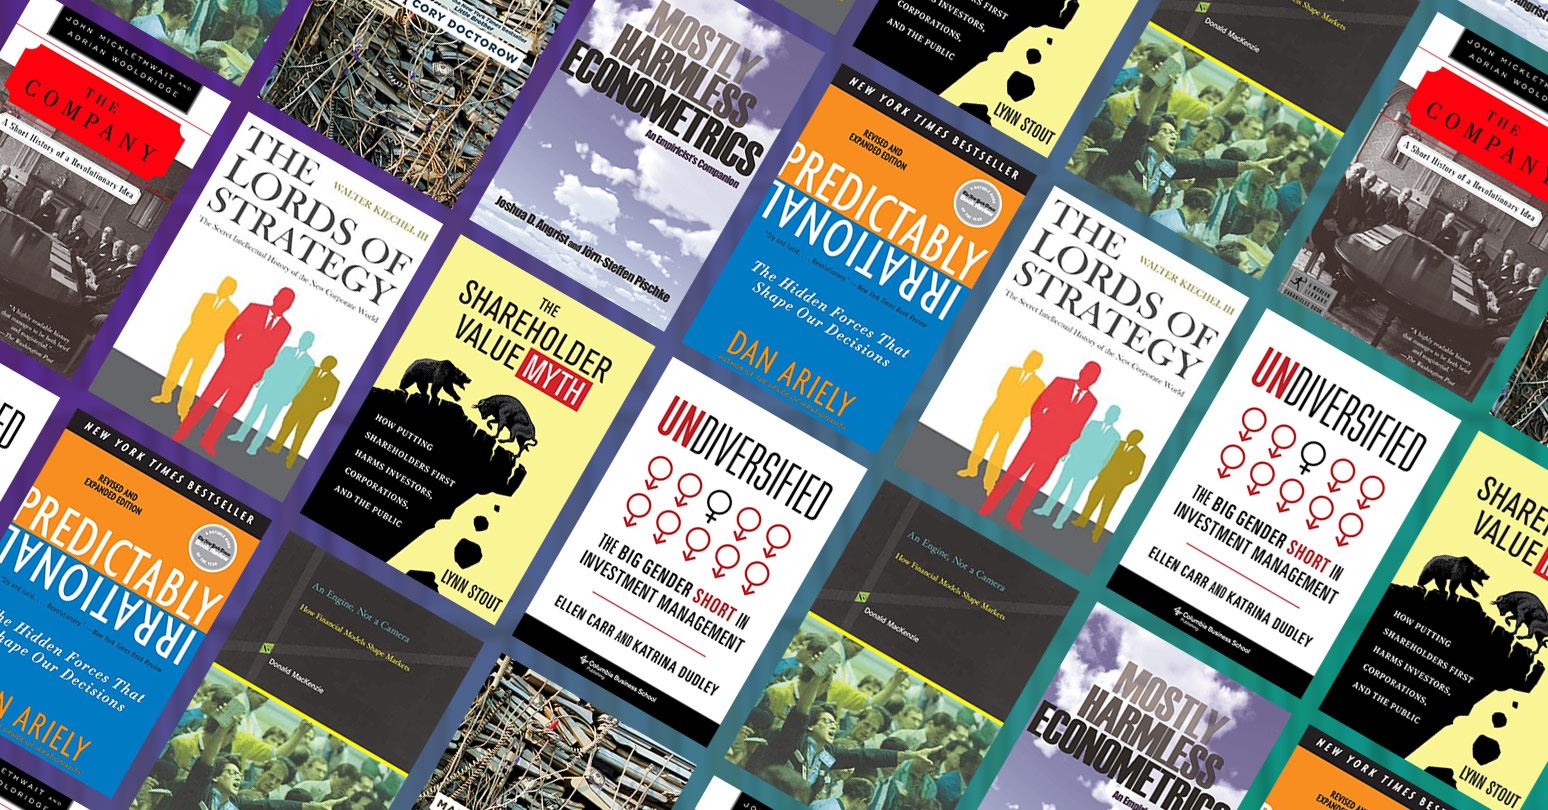 Essential business book picks from Ivey faculty 